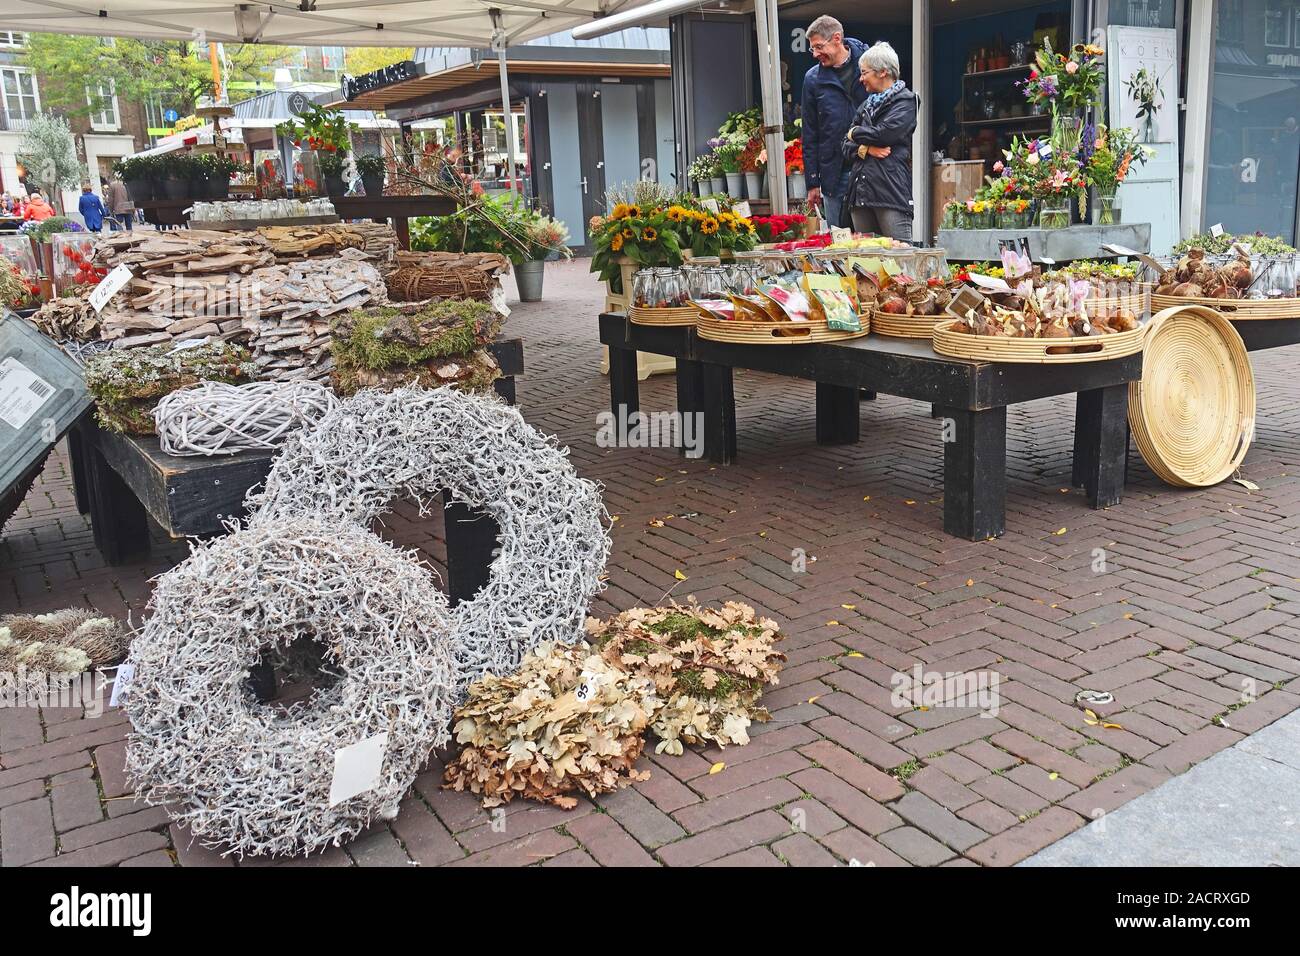 Dried plant displays on an open-air market stall in Middelburg, Zeeland, Netherlands Stock Photo